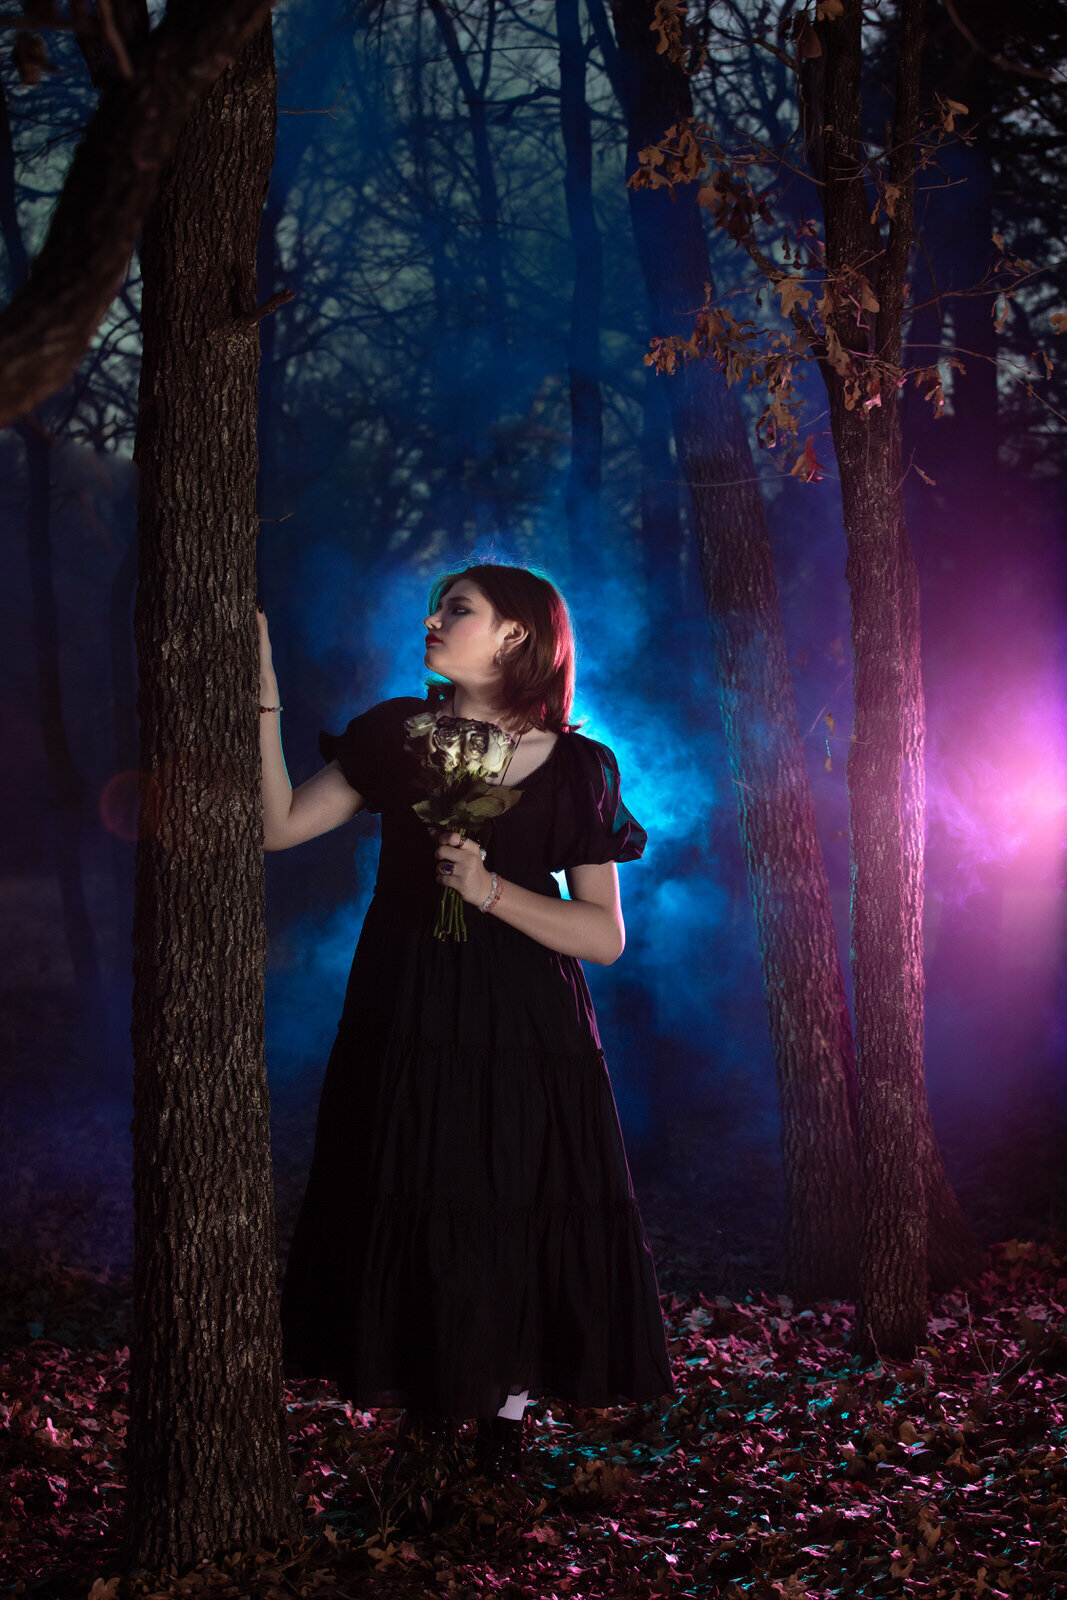 senior-girl-standing-by-tree-with-blue-and-purple-colored-lights-backlit